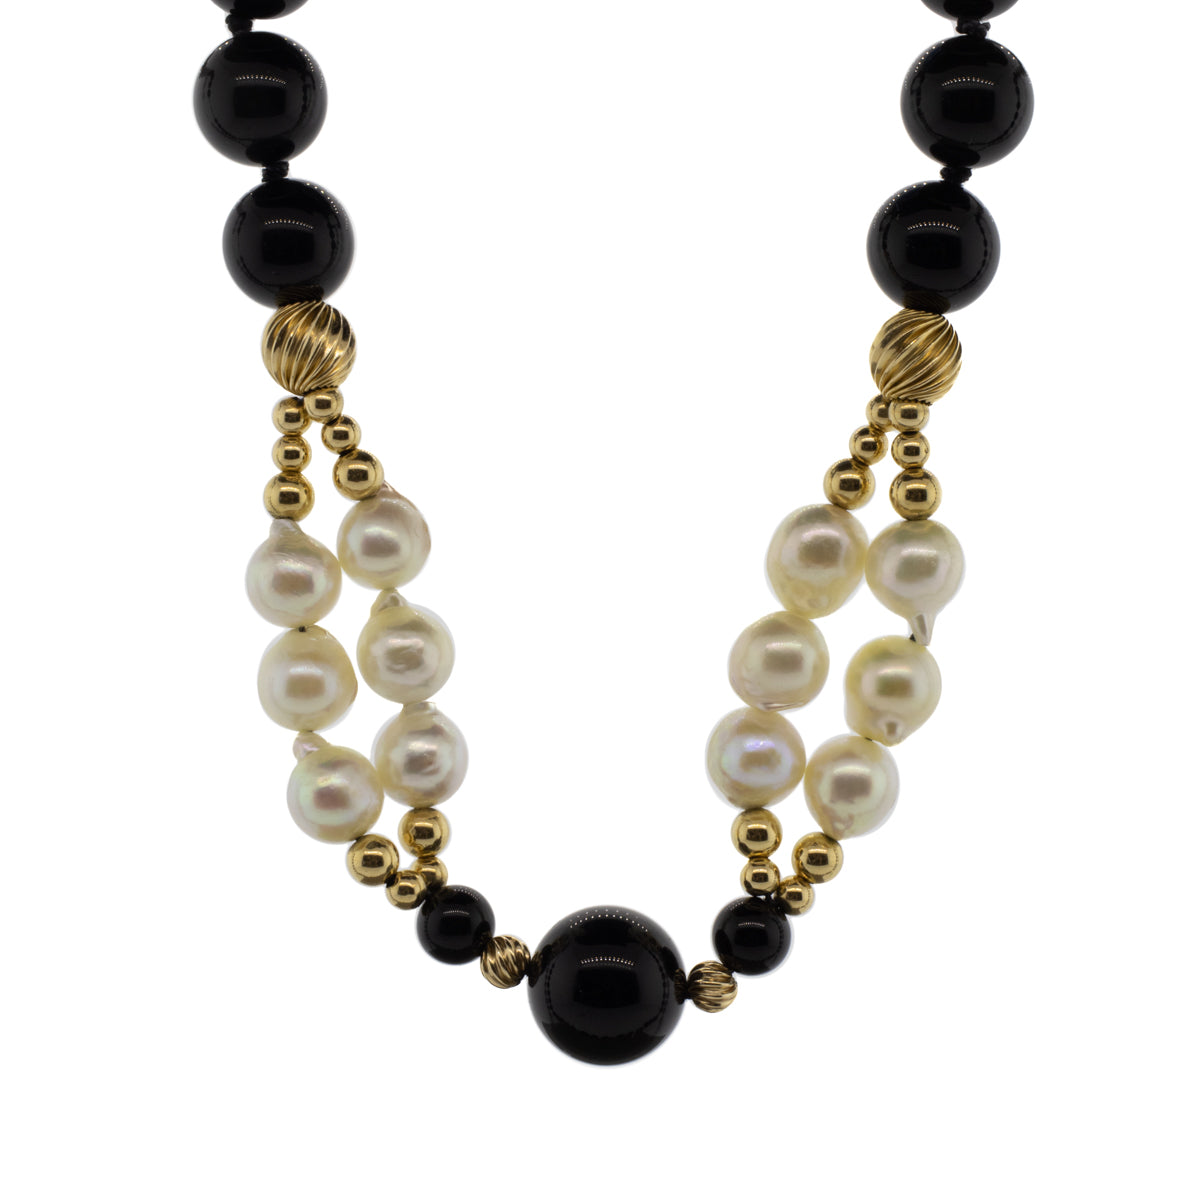 Onyx, Akoya Pearl and Gold Bead Necklace